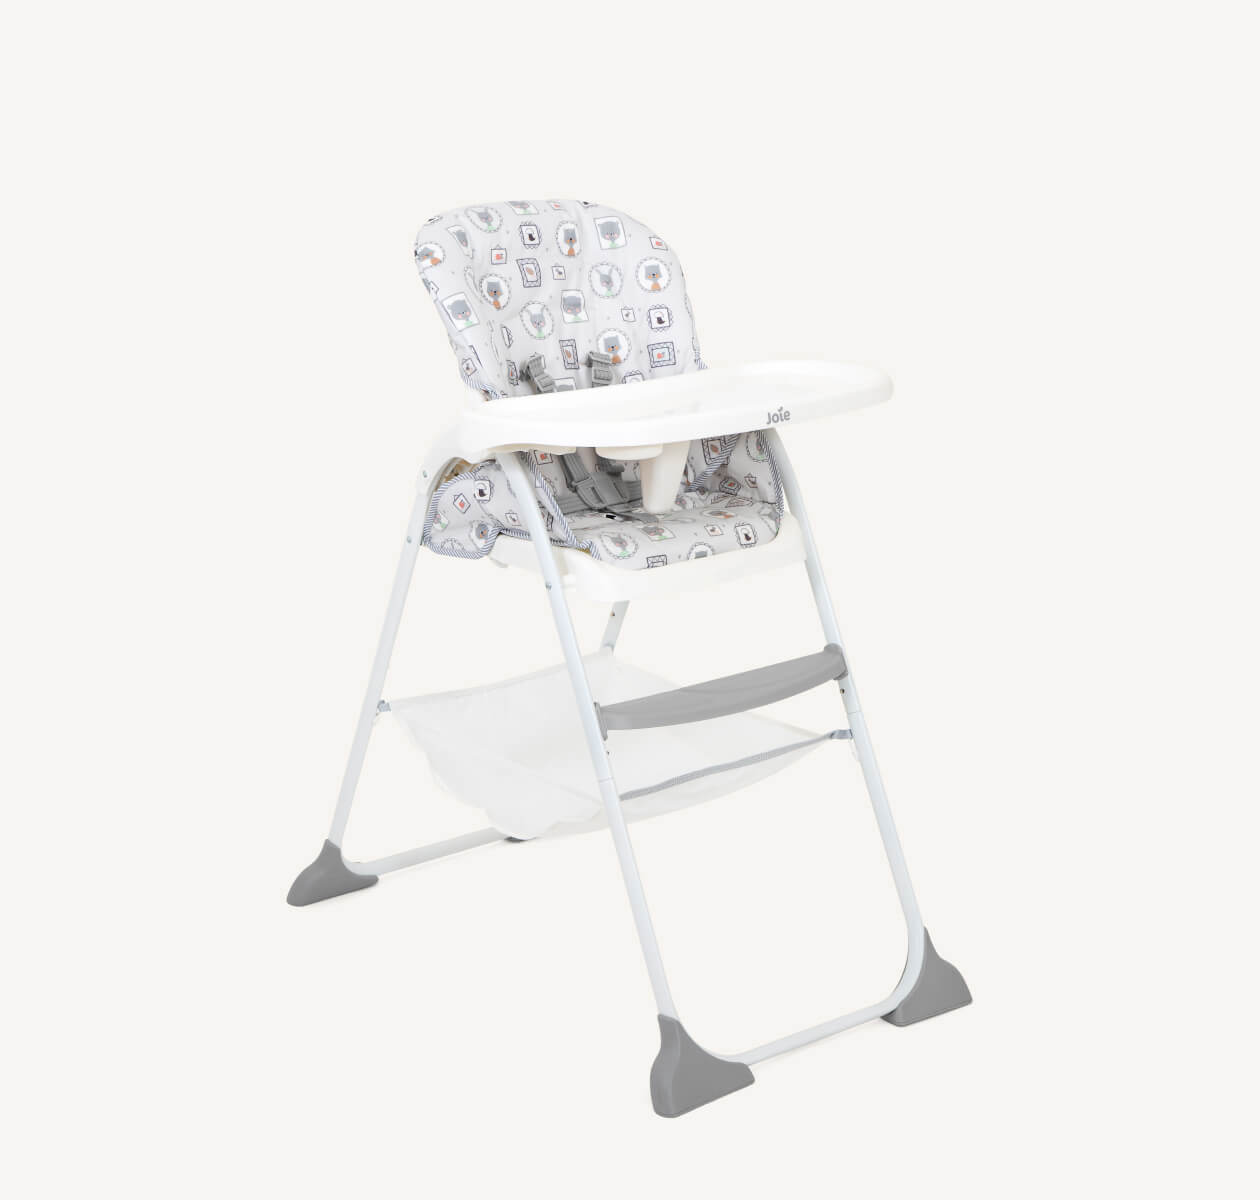 JOIE Mimzy™ Snacker 3 positions High Chair Portrait